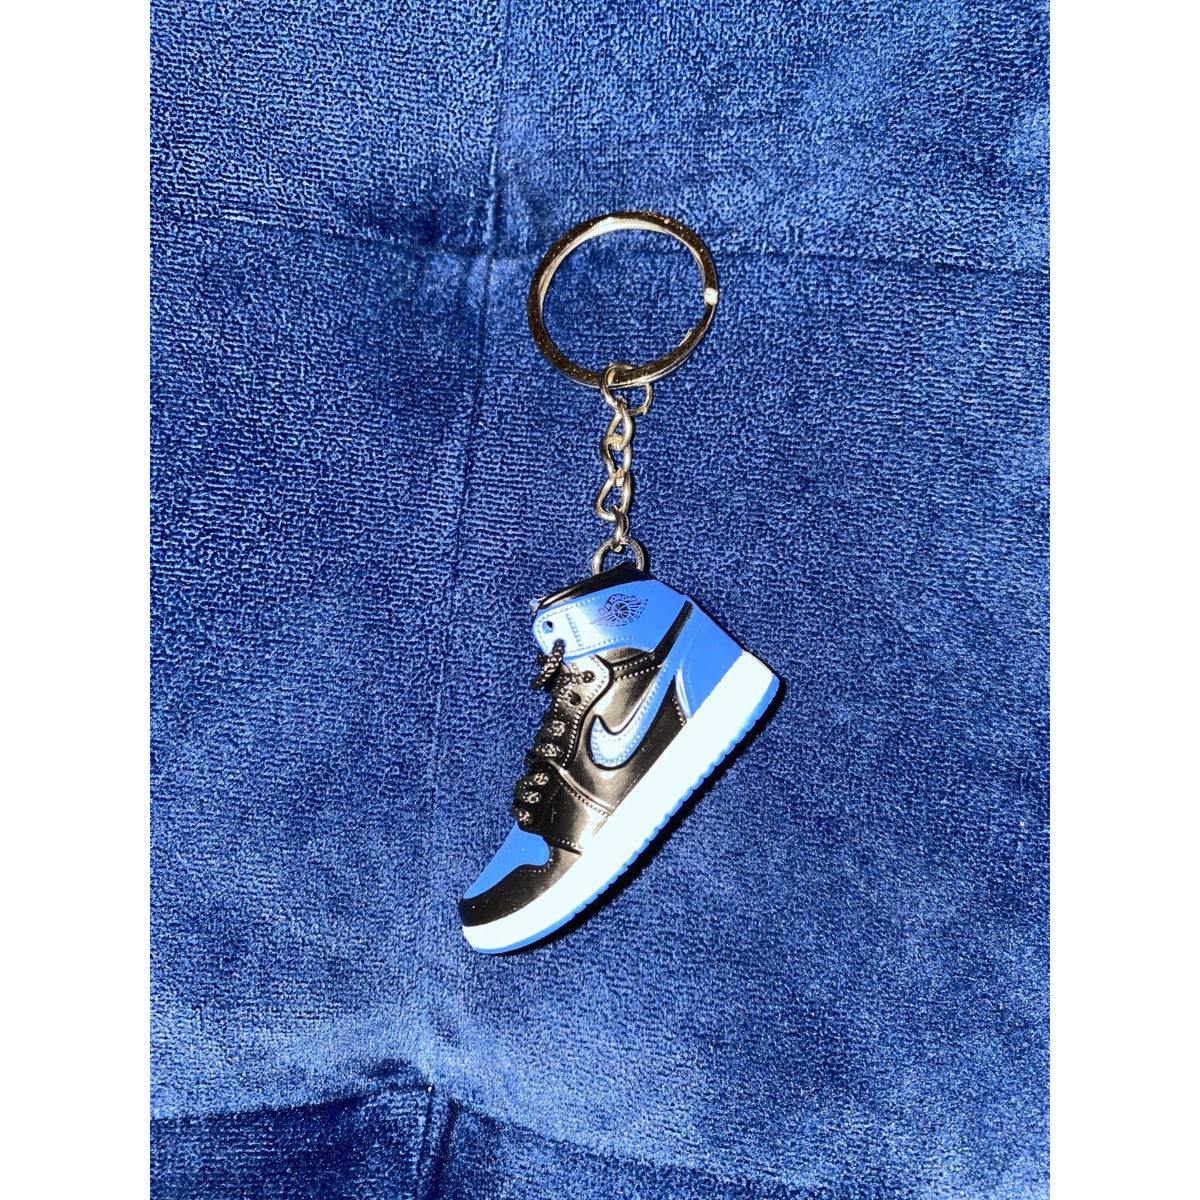 SNEAKER KEYCHAIN - BLUE - HAUS OF RISS